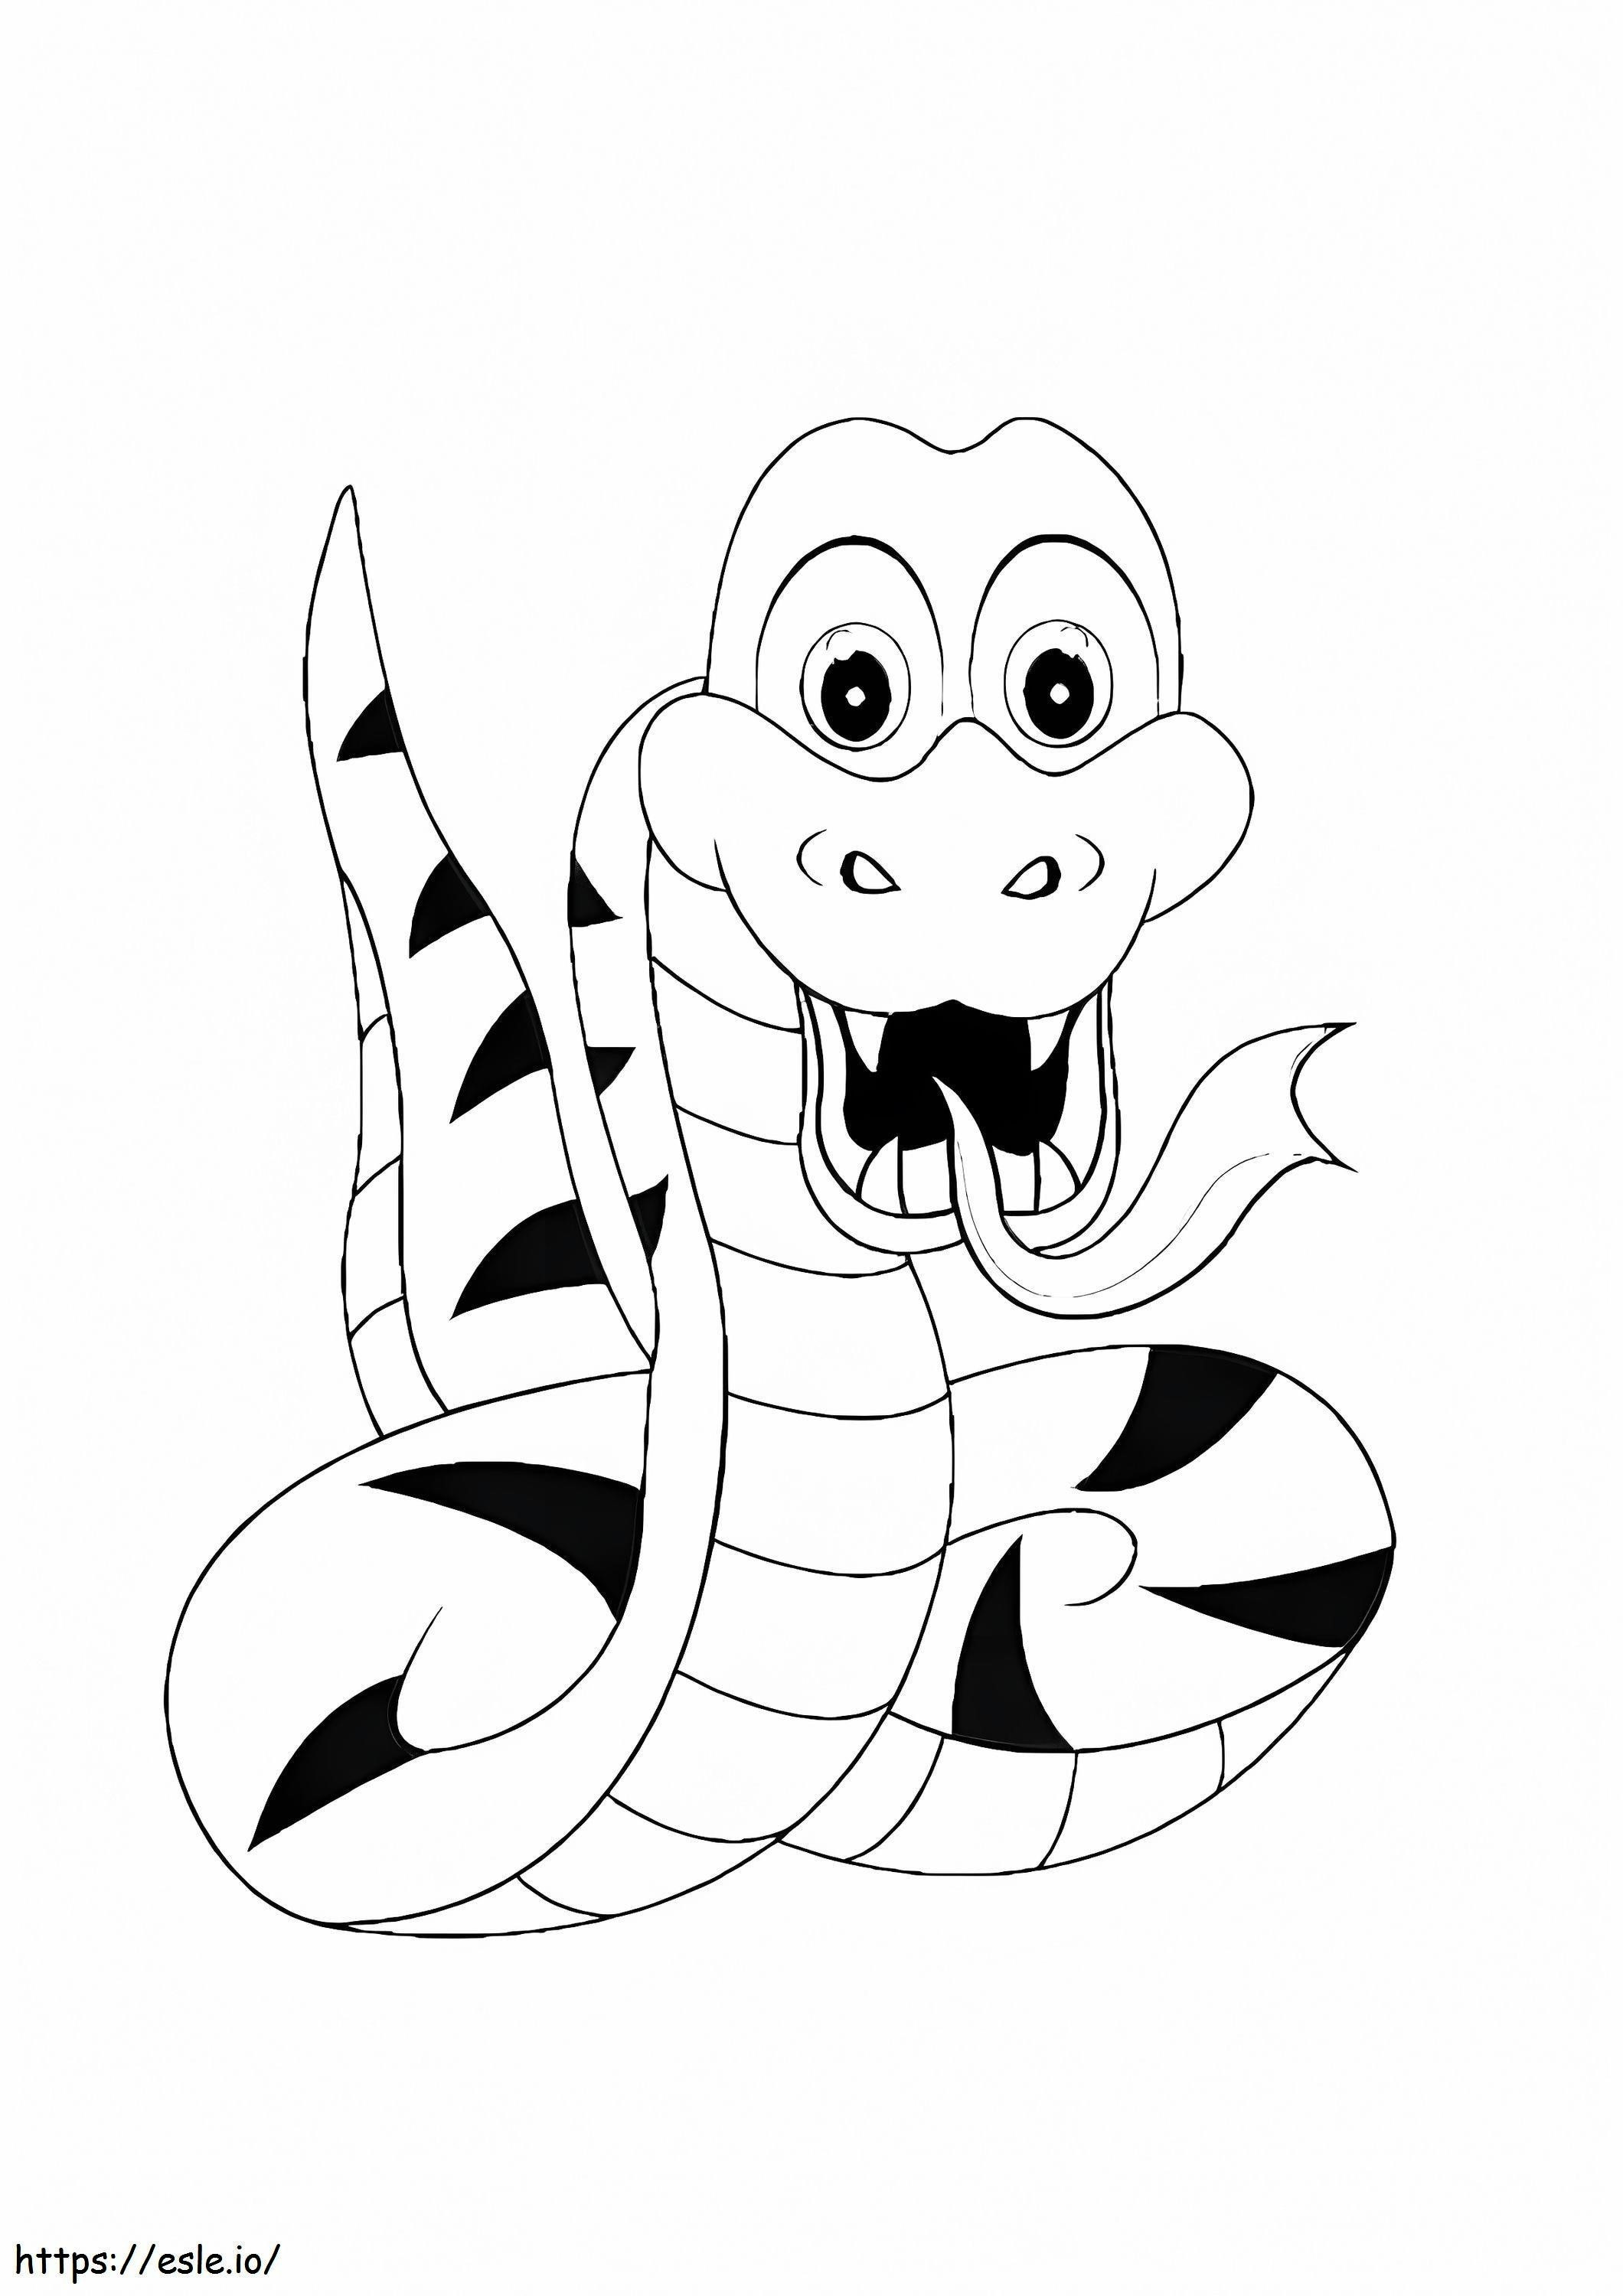 Snake Is Happy coloring page